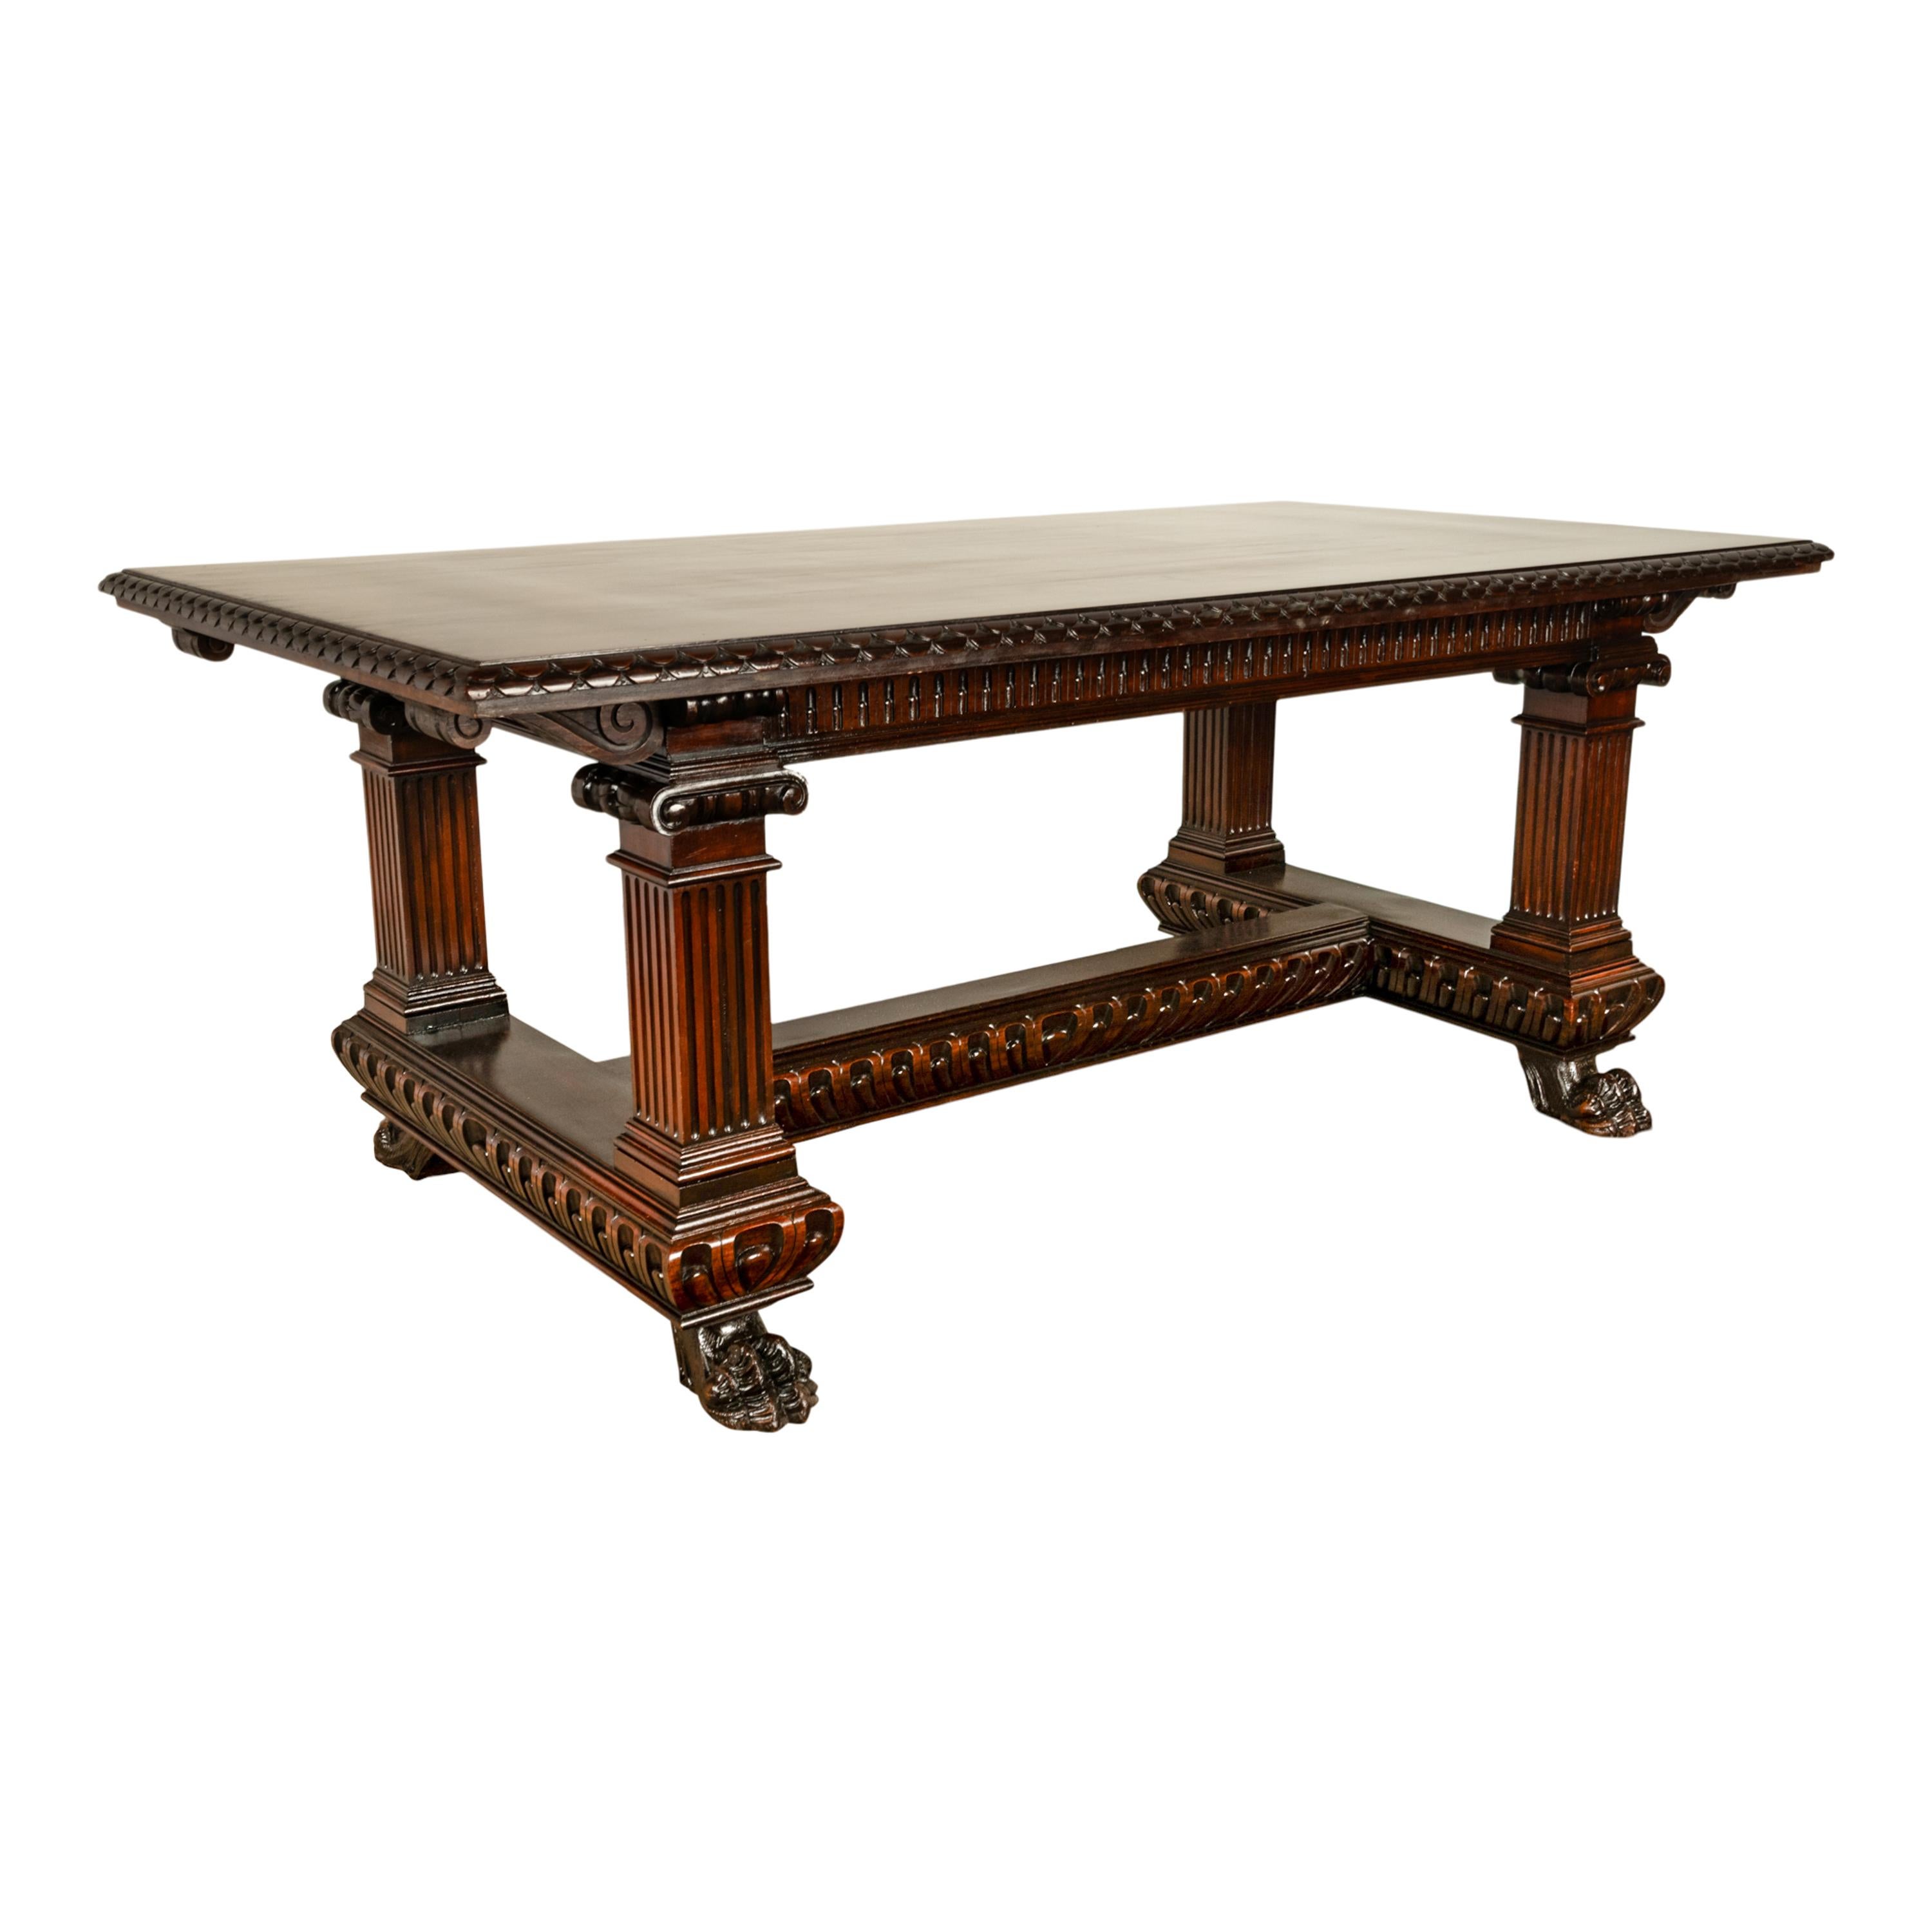 Antique Italian Carved Renaissance Revival Walnut Library Dining Table 1880 For Sale 3